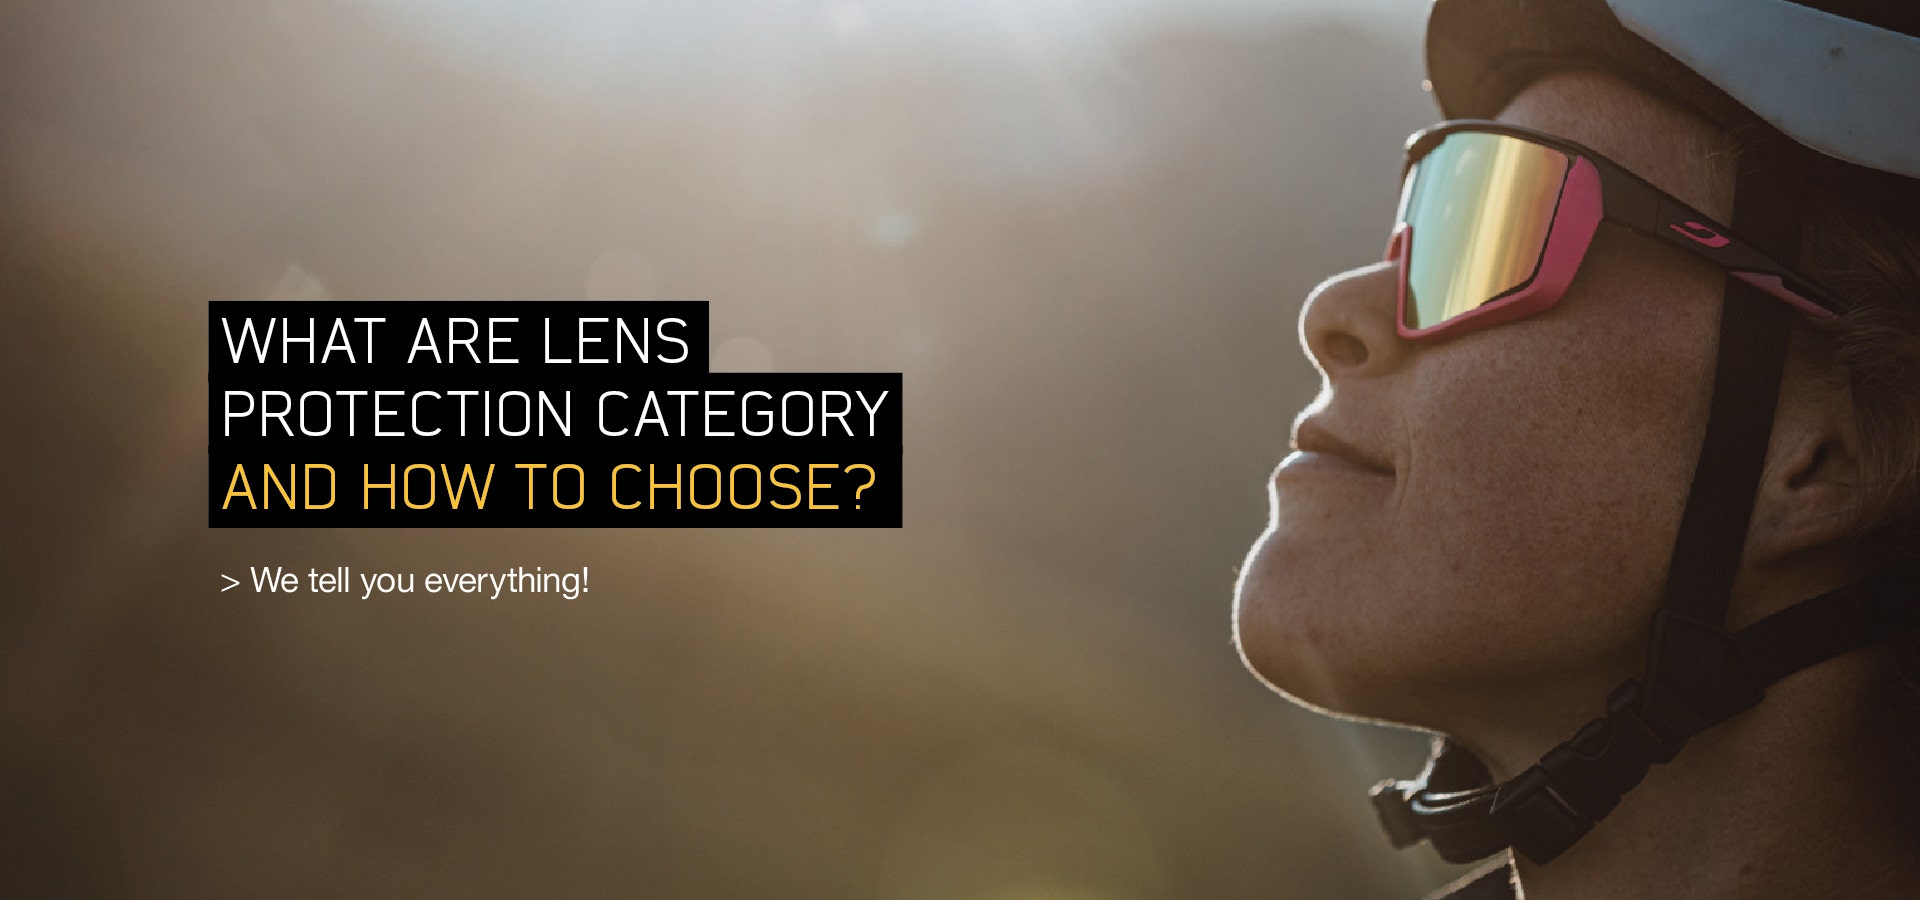 What are lens protection category and how to choose?